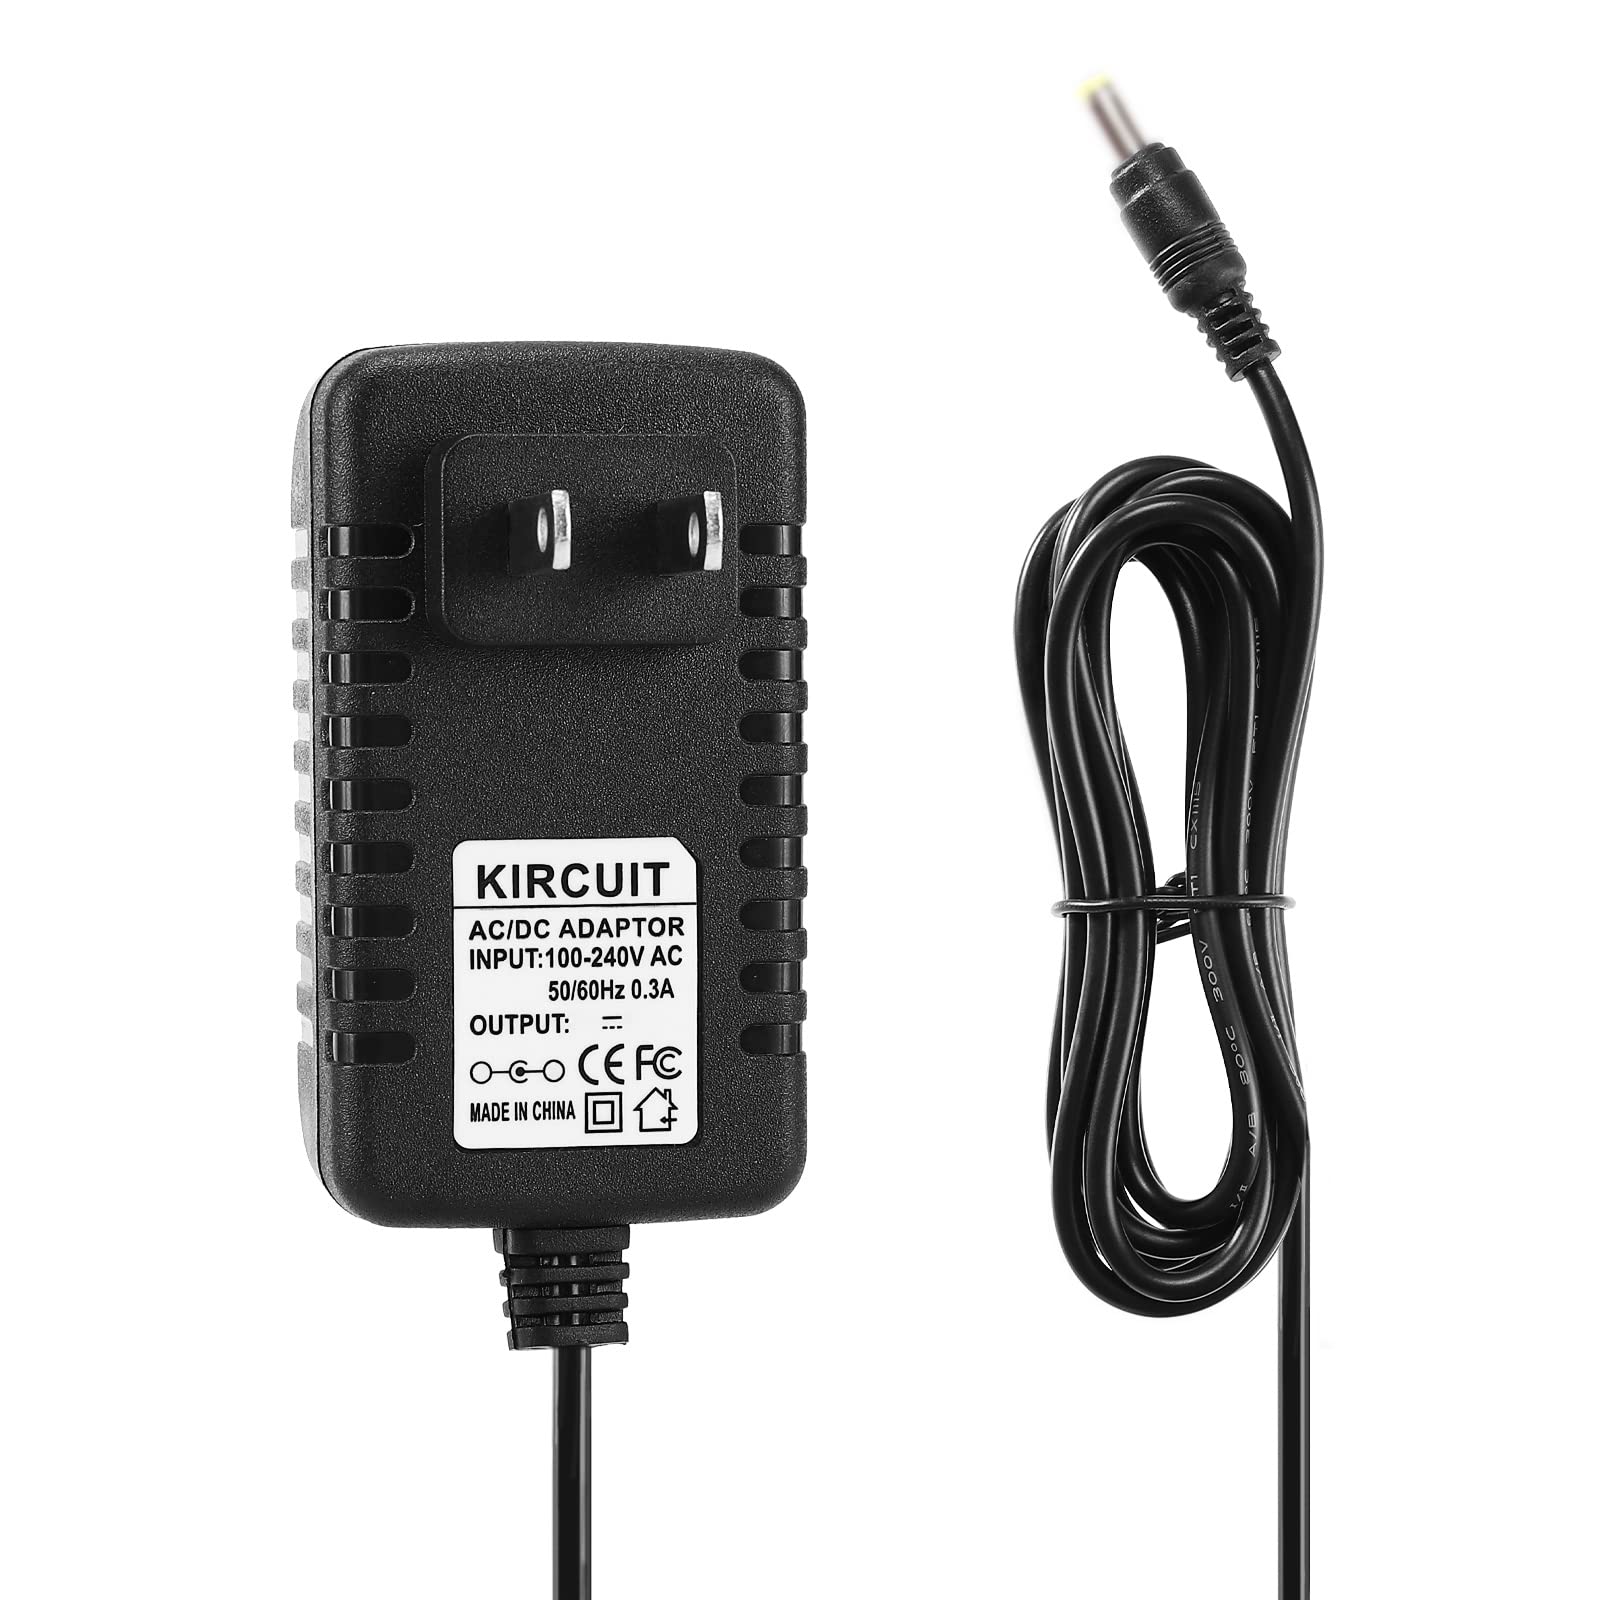 Kircuit New Global AC/DC Adapter Replacement for Zidoo X9 X9S X8 TV Box Realtek RTD1295 3D UHD 4K Media Player 12V DC Power Supply Cord Cable Charger Mains PSU